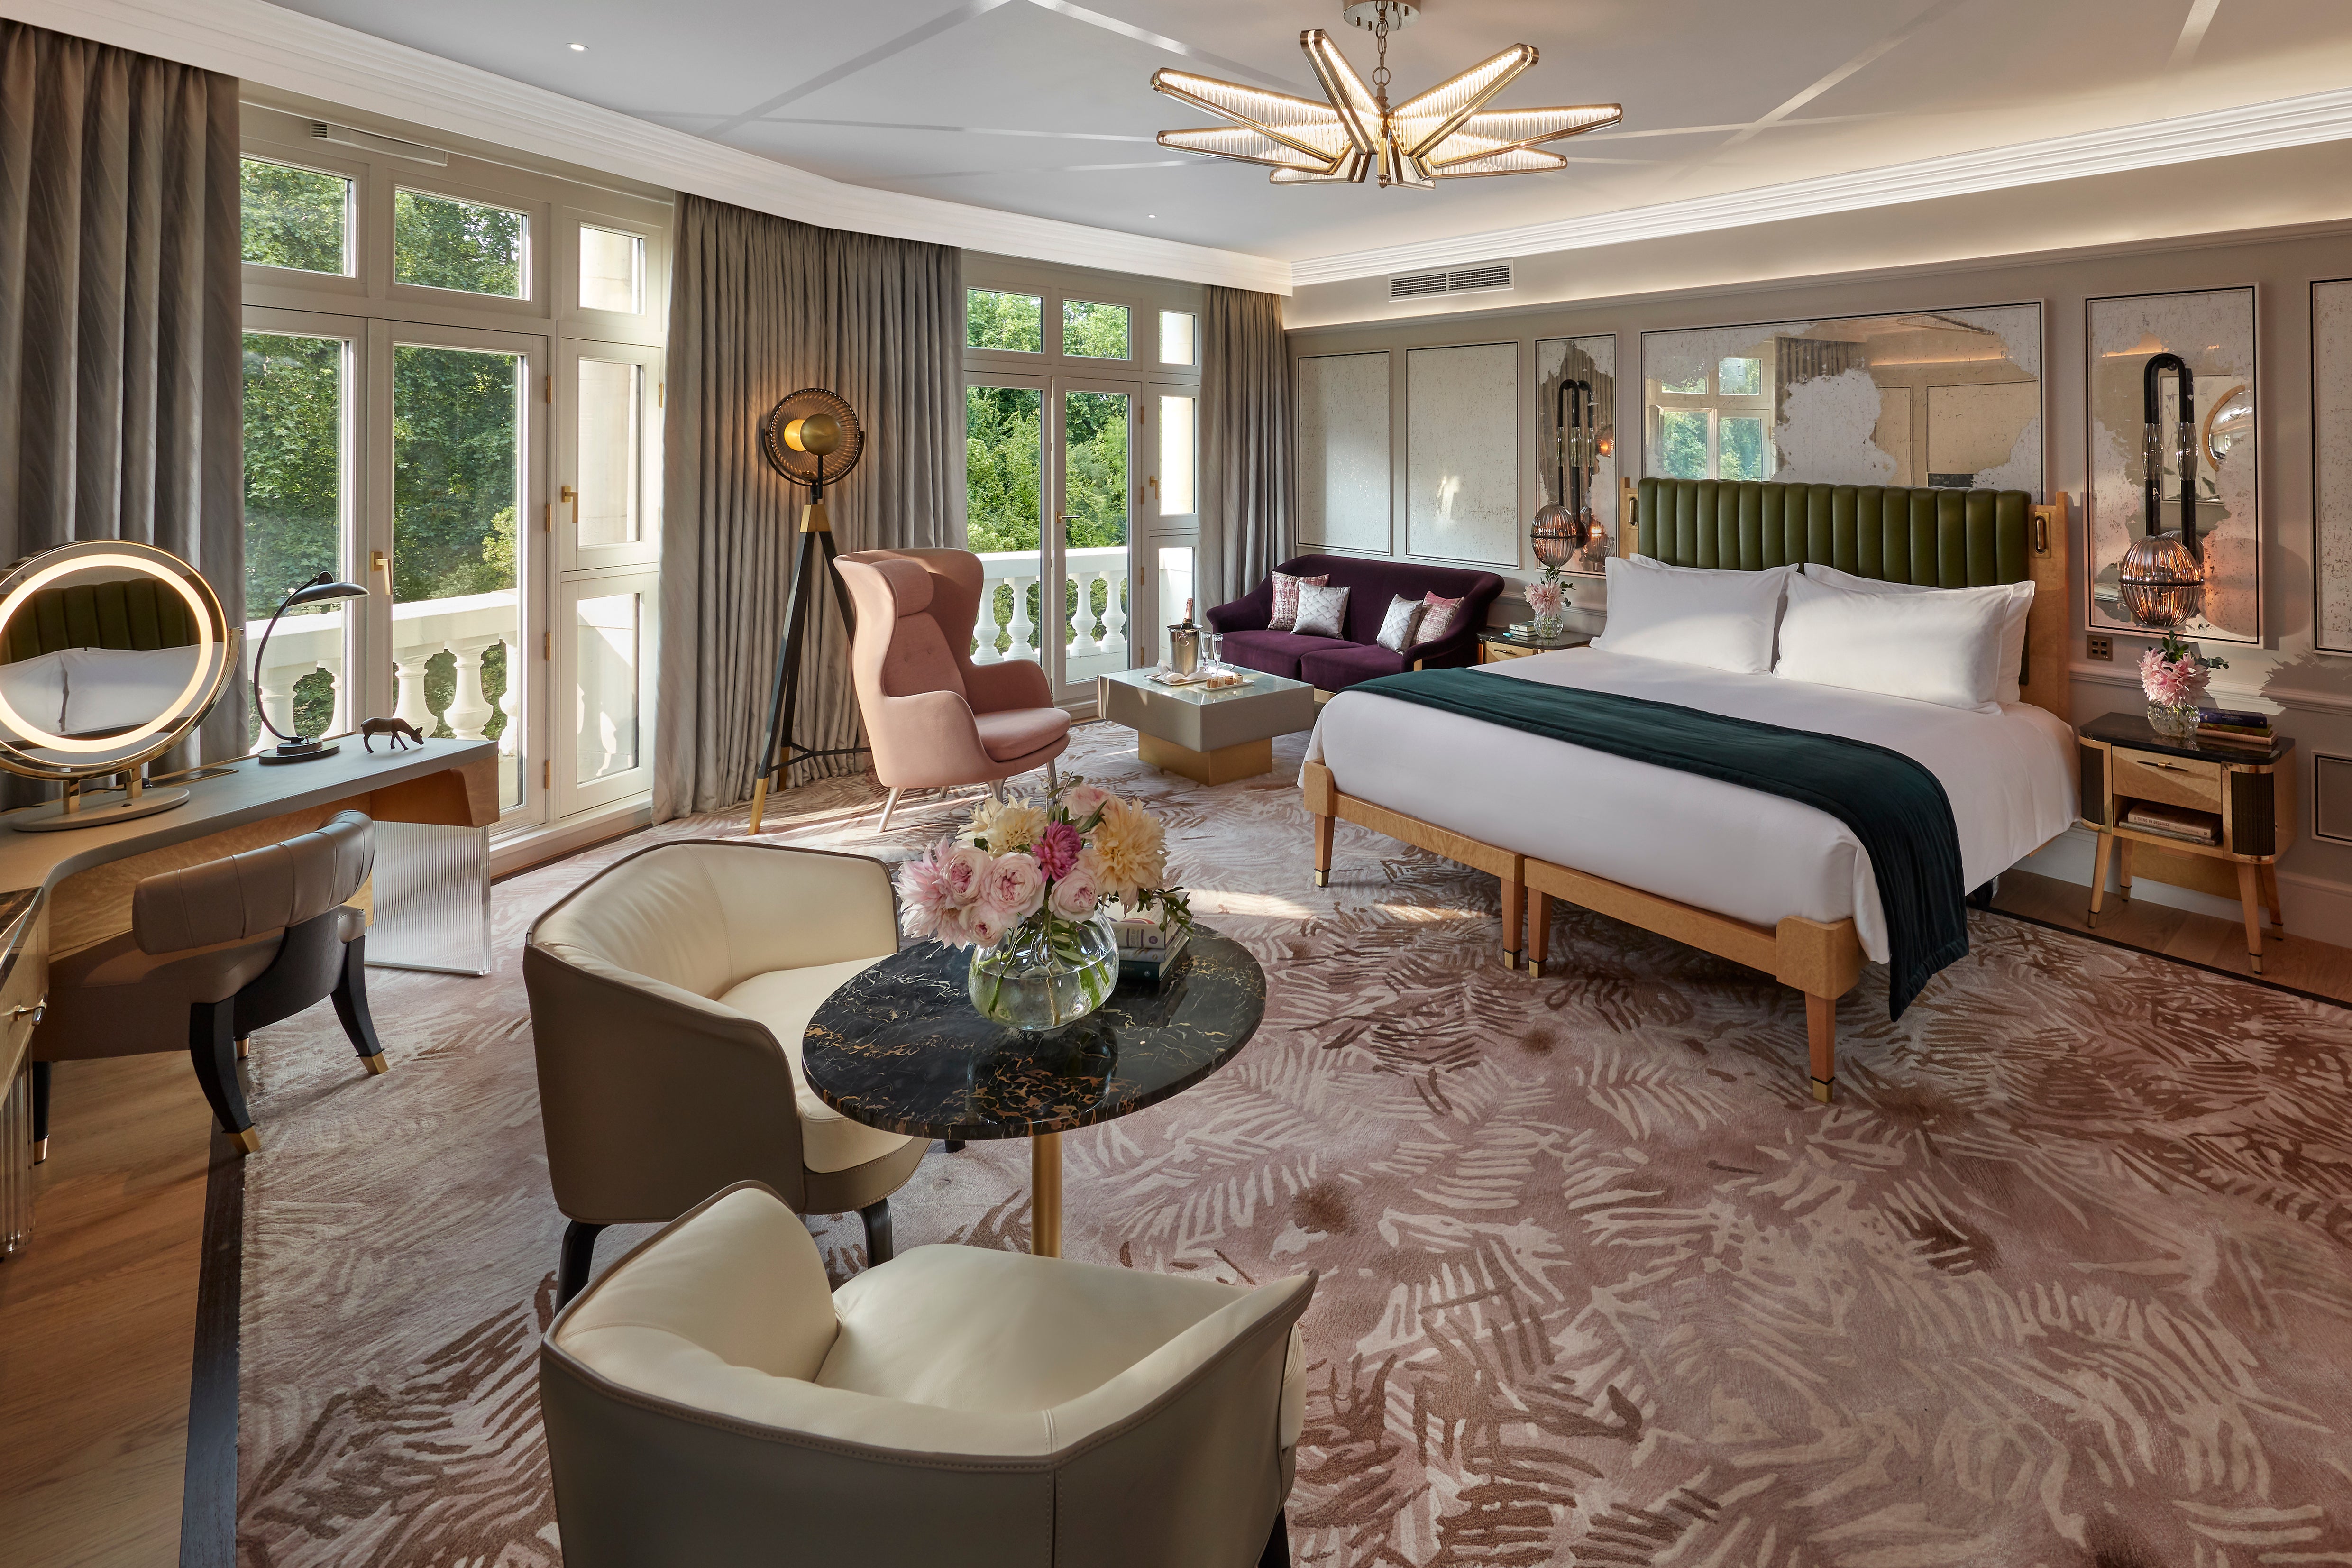 You’ll never want to leave the luxurious suites